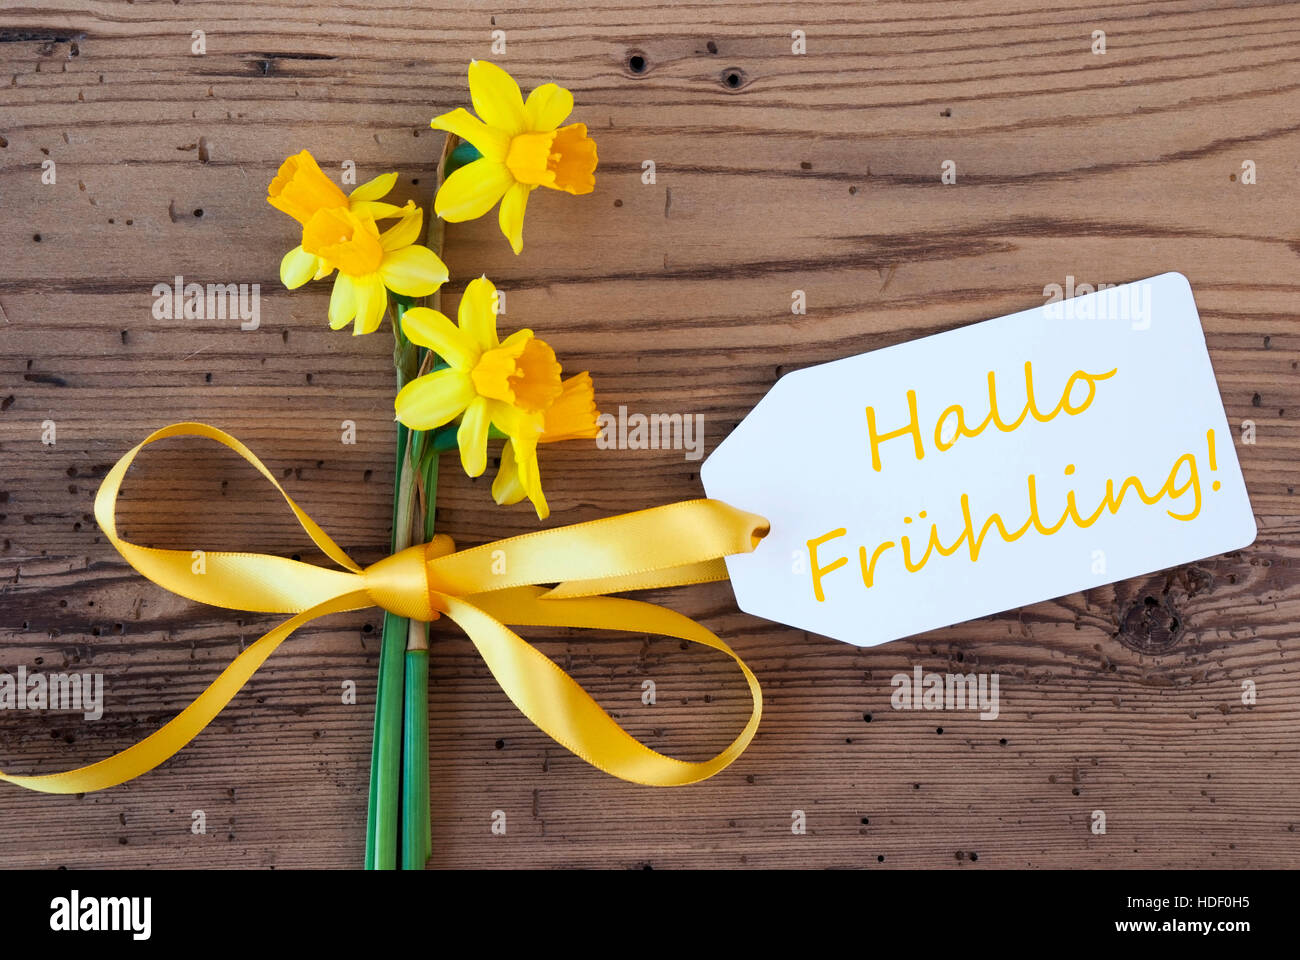 Yellow Narcissus, Label, Hallo Fruehling Means Hello Spring Stock Photo